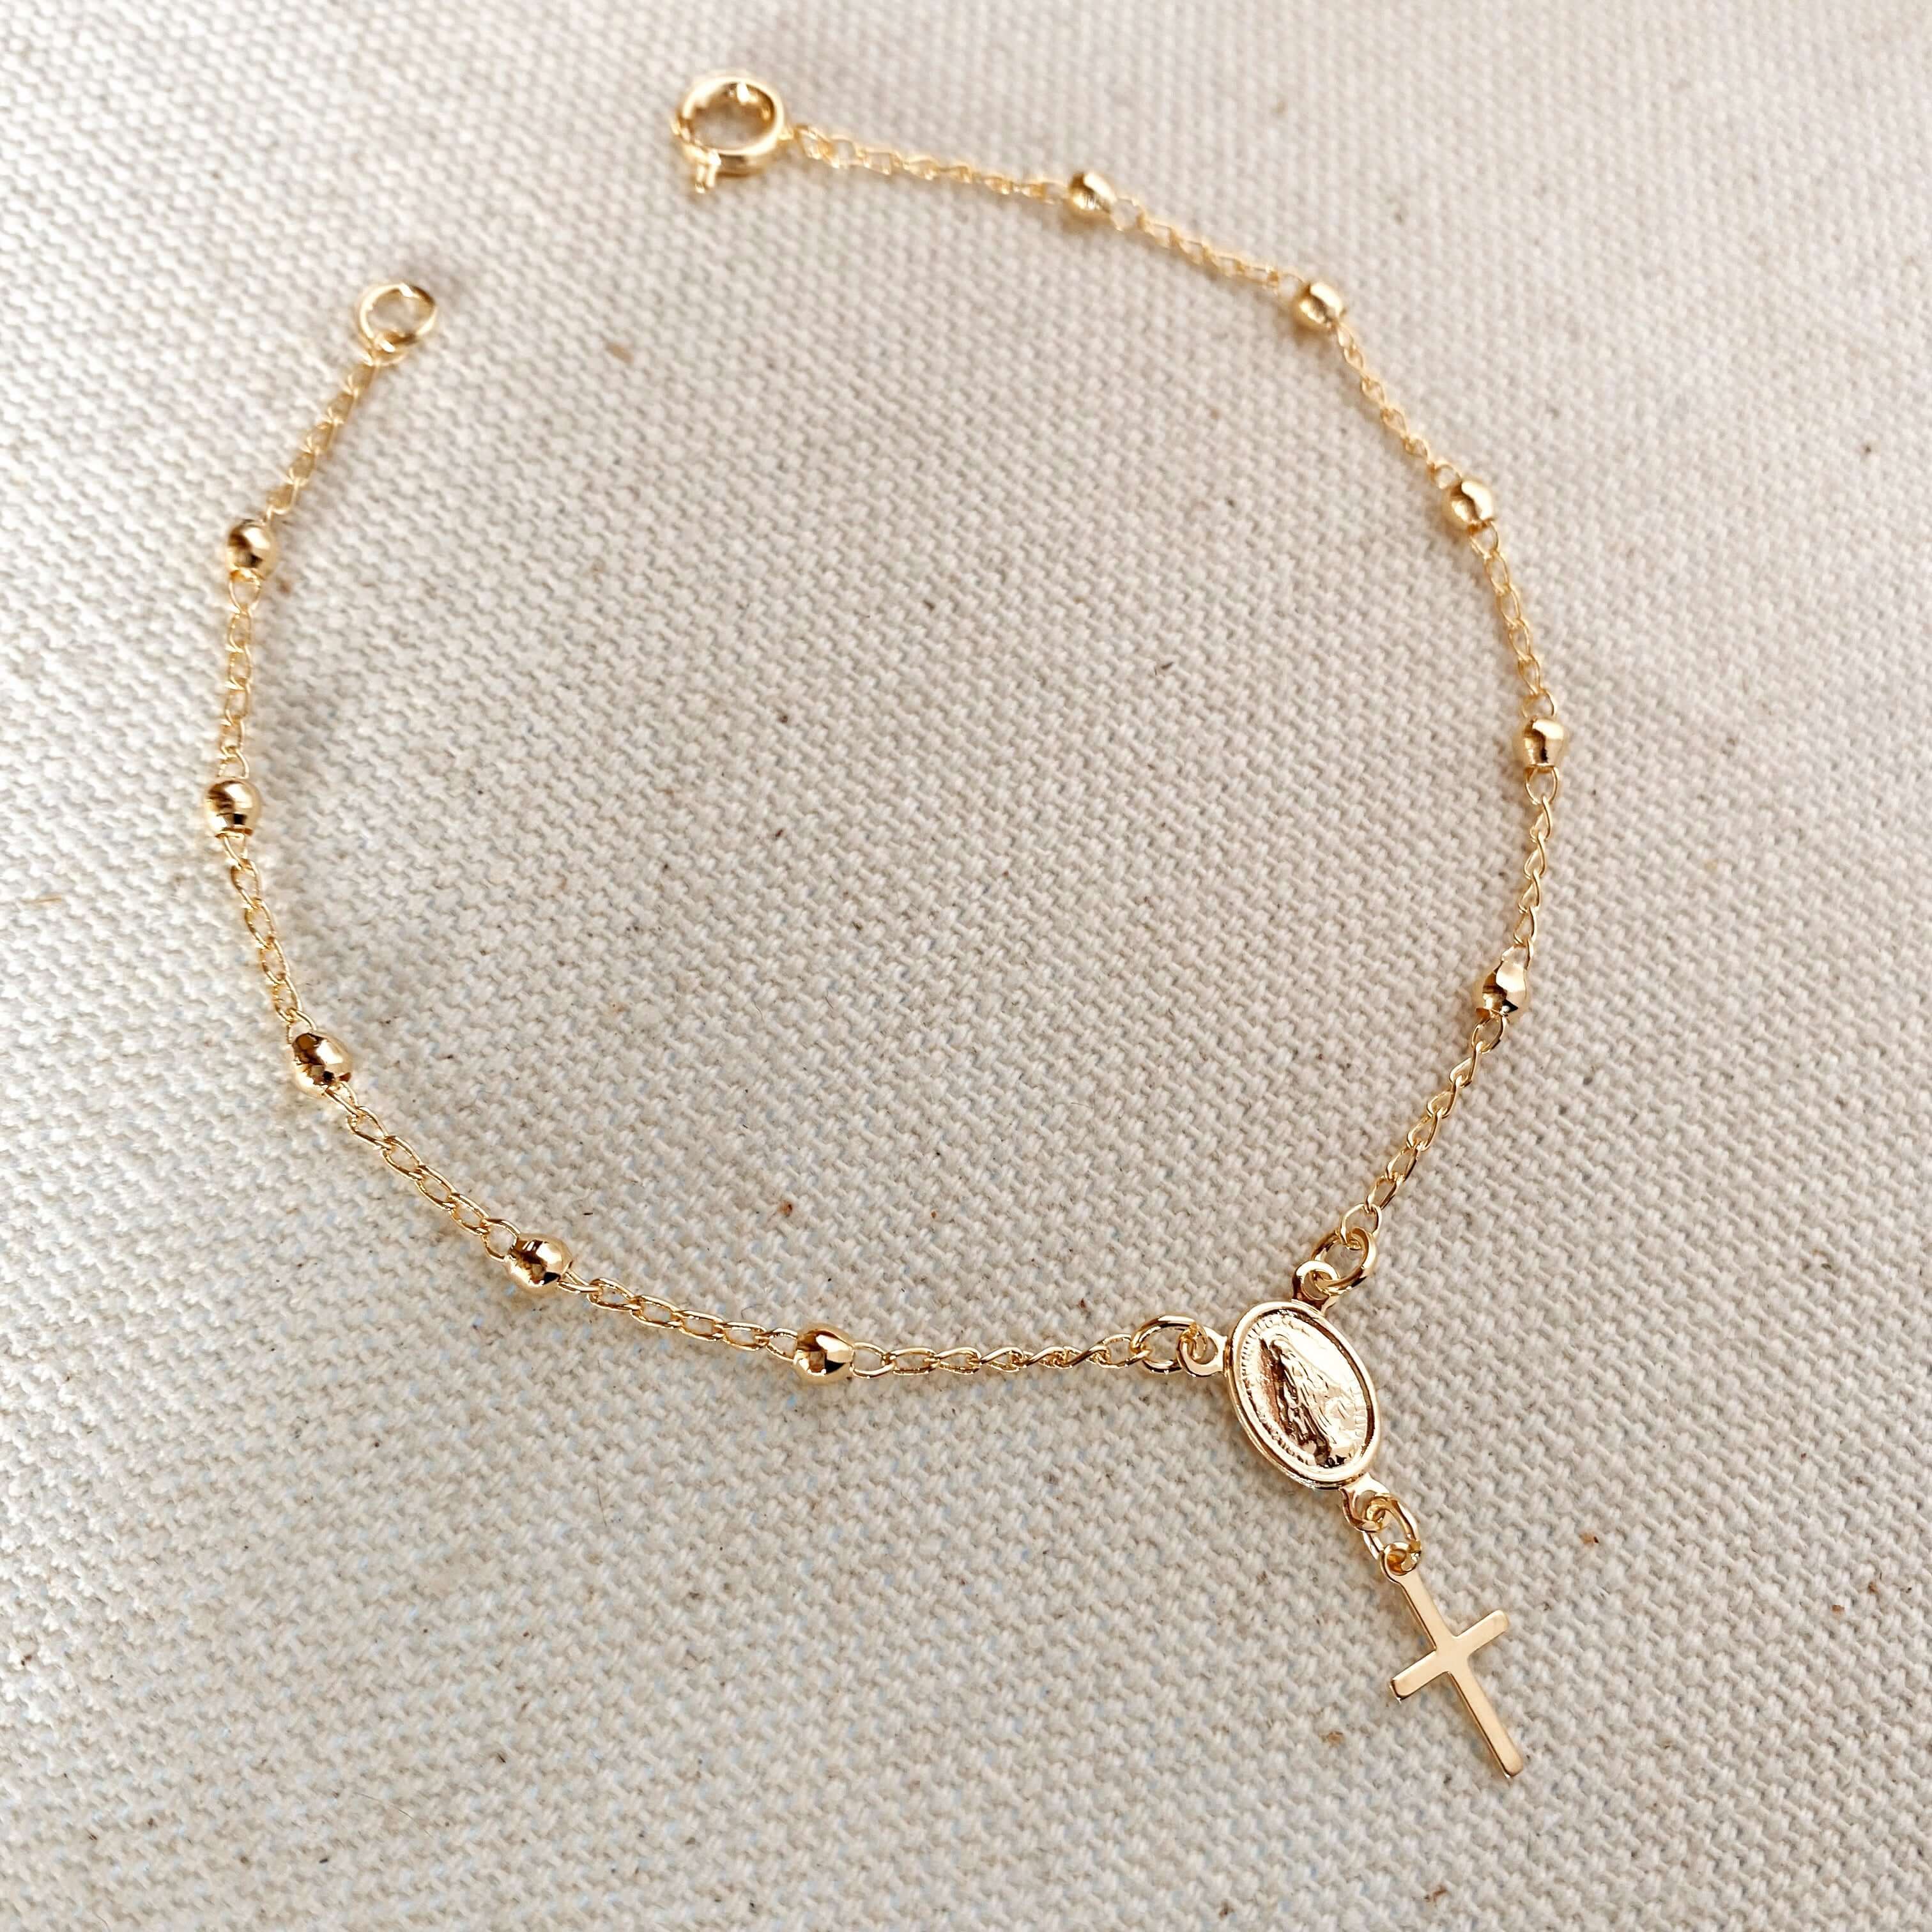 9ct yellow Gold rosary beads bracelet miraculous medal cross